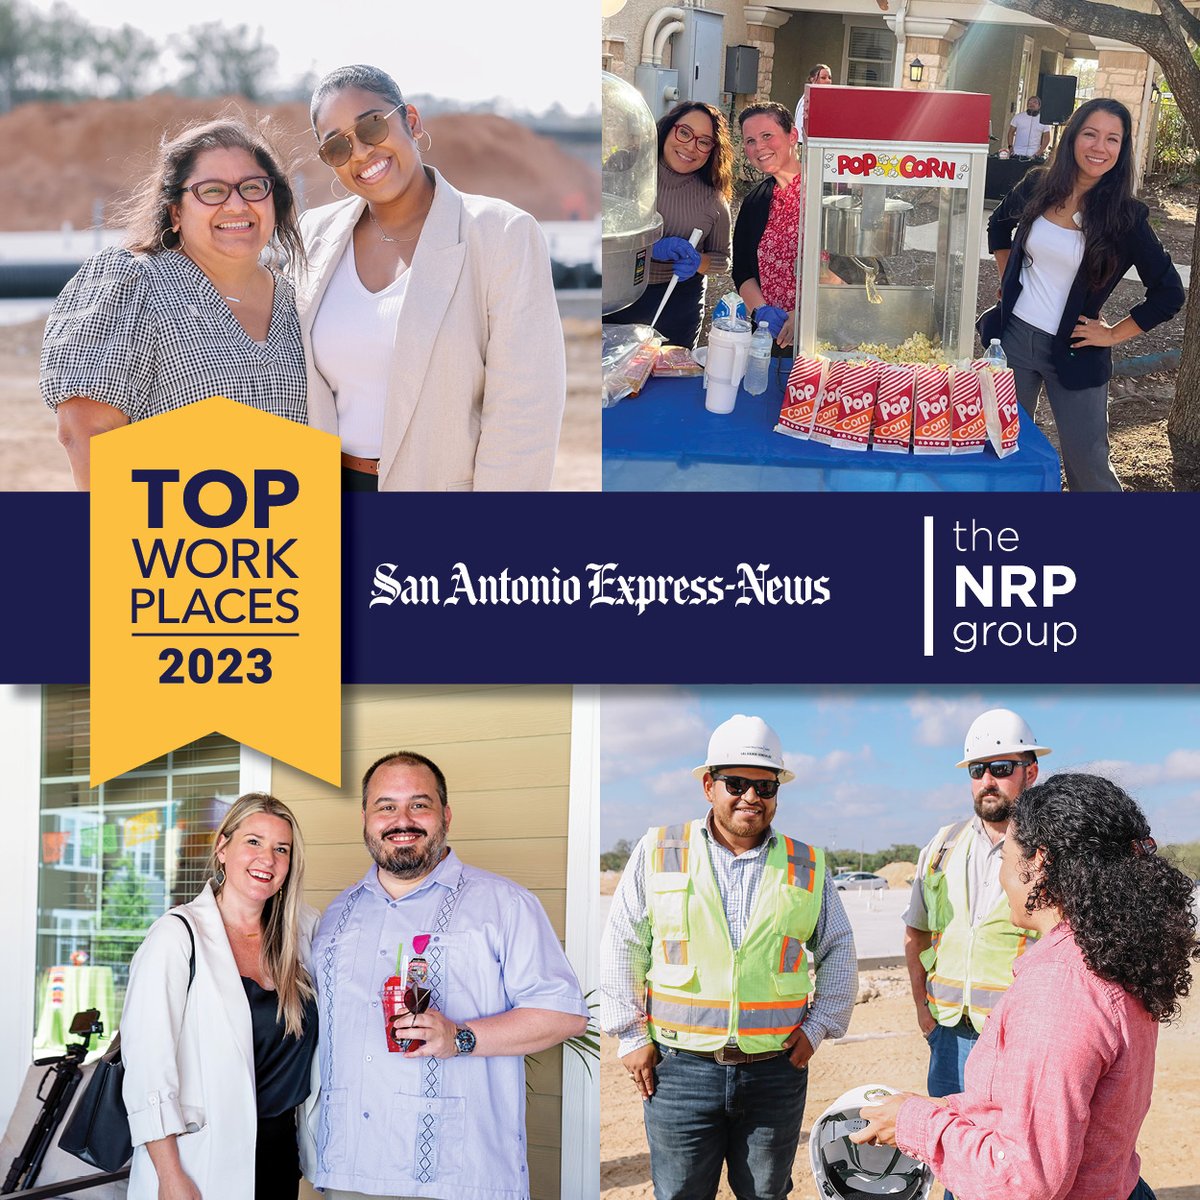 ICYMI: San Antonio Express News has named The NRP Group a top ten midsize workplace for the second year in a row! See the full list here: topworkplaces.com/award/mysanant… #TeamNRP #topworkplaces2023